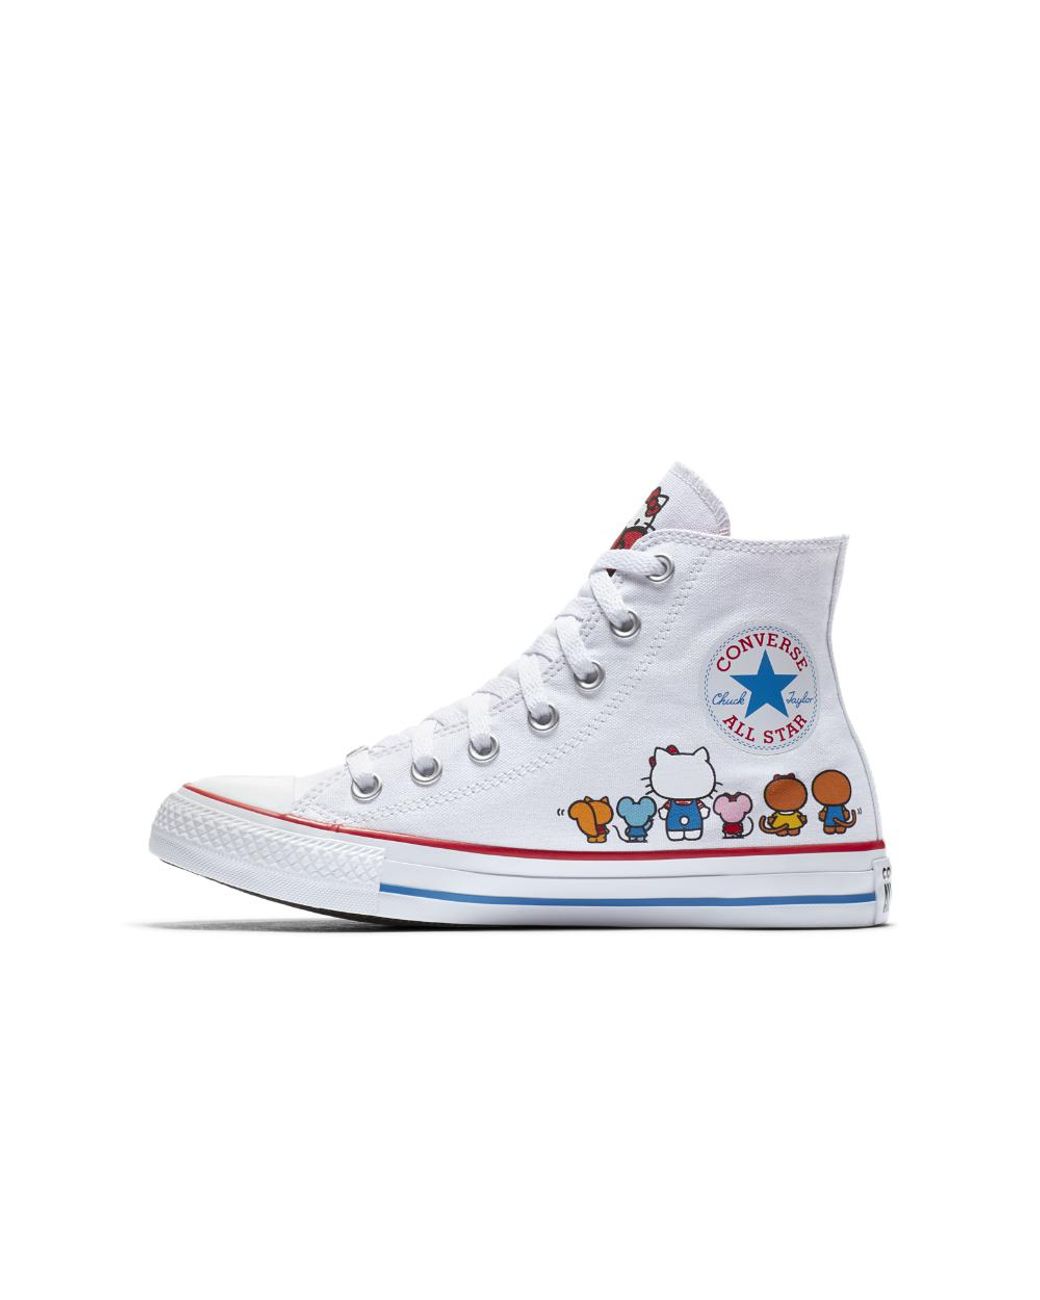 Converse X Hello Kitty Chuck Taylor Star White & Prism Pink High Womens Shoes | Lyst